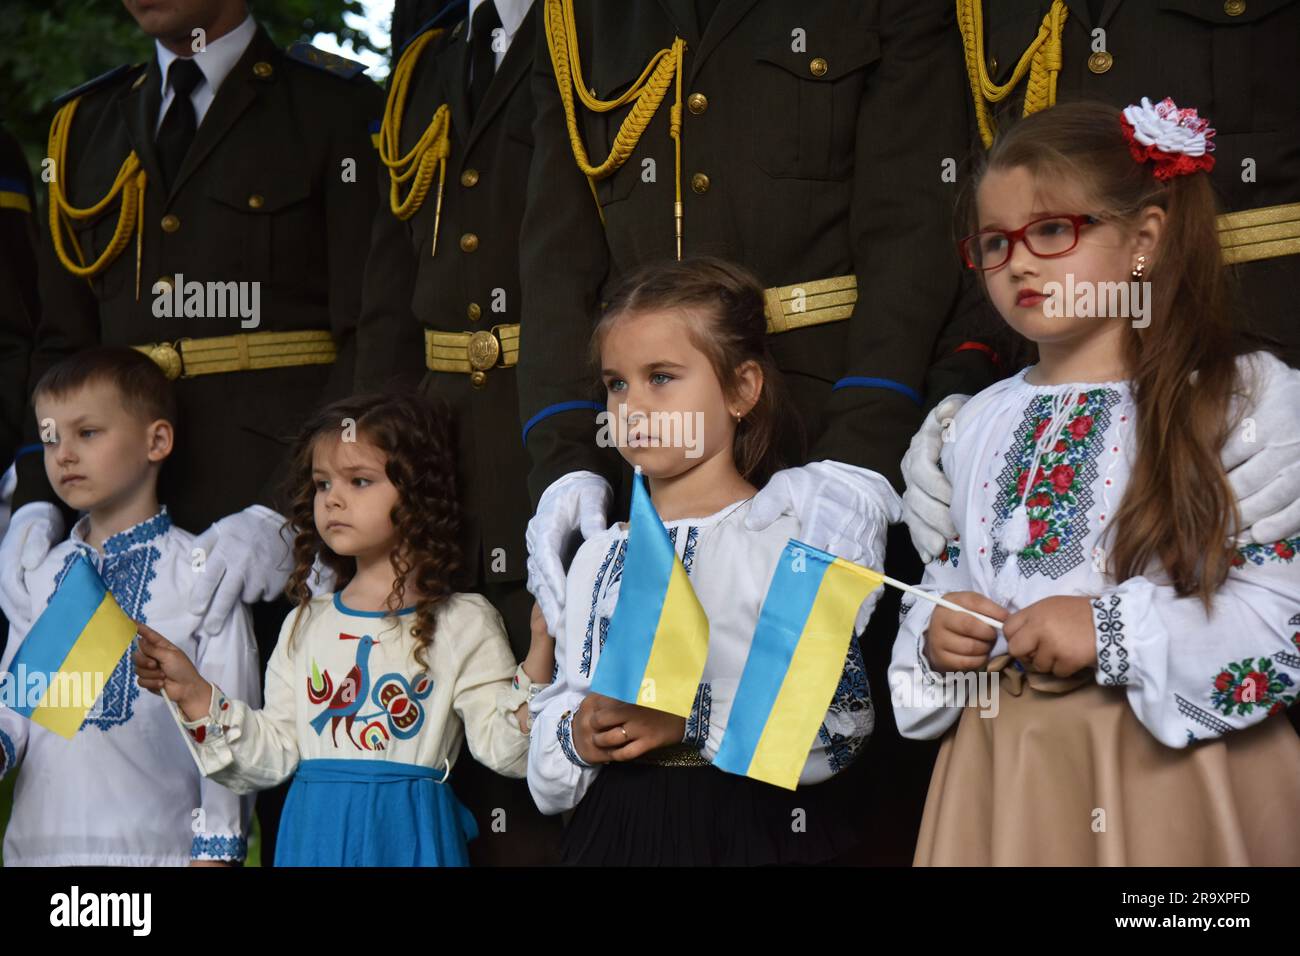 Children with Ukrainian flags during the celebration of the Constitution Day of Ukraine. Ukraine celebrated the 27th anniversary of the adoption of the country's basic law - the constitution. In the conditions of the Russian-Ukrainian war, official events were very short. In Lviv, the Ukrainian flag was raised, honor guard marched, and a military band performed. (Photo by Pavlo Palamarchuk / SOPA mages/Sipa USA) Stock Photo